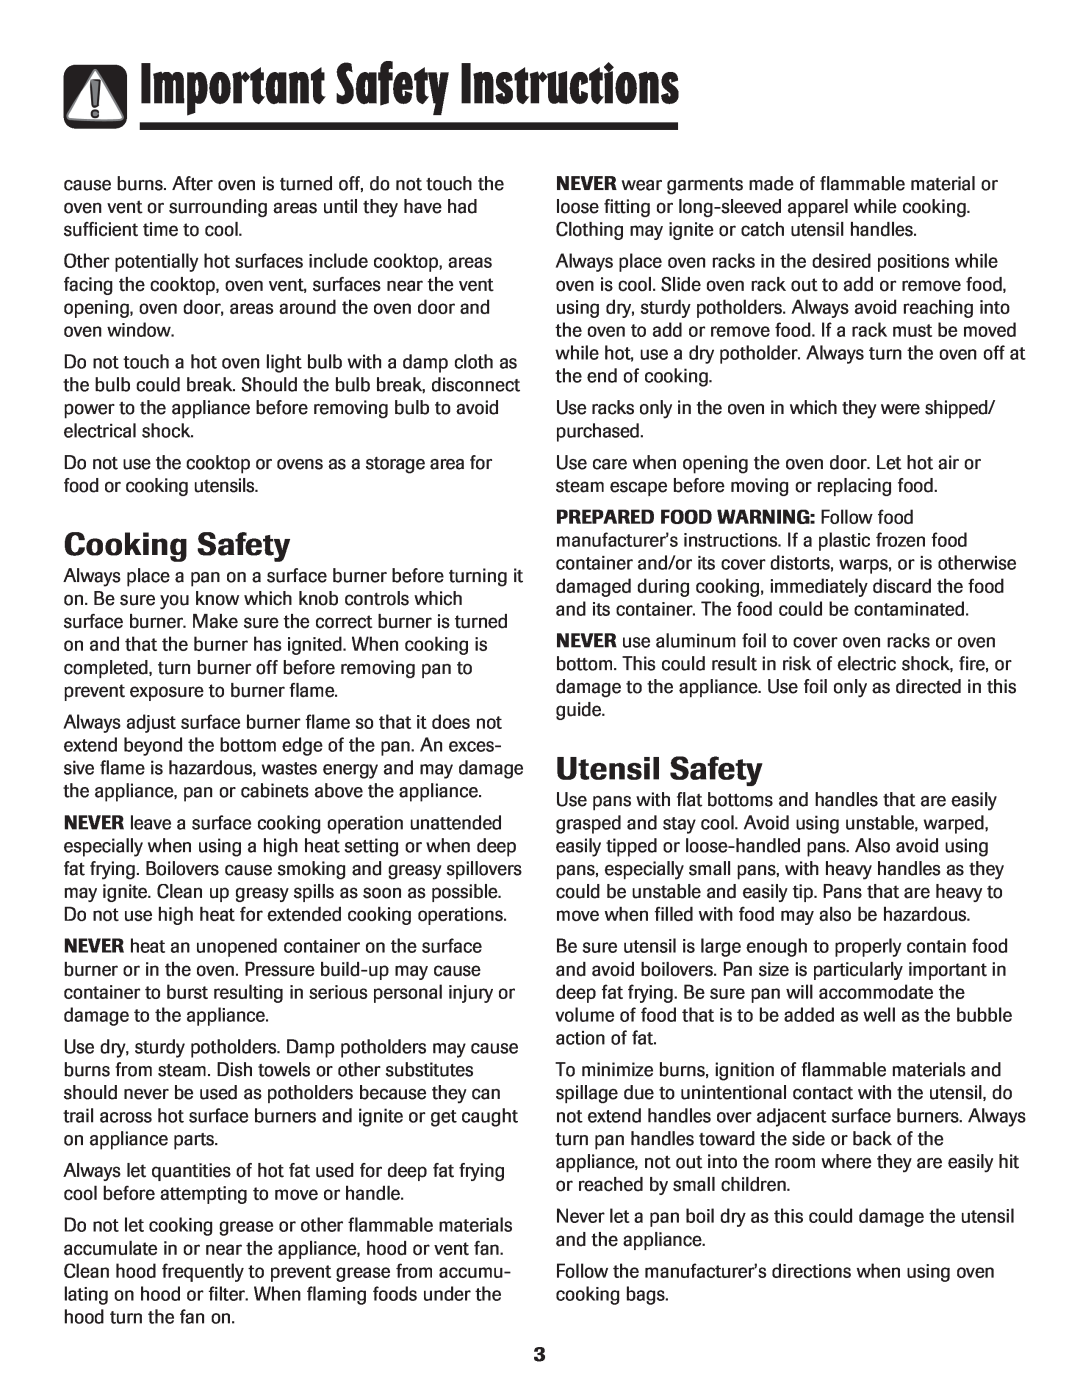 Amana pmn important safety instructions Cooking Safety, Utensil Safety, Important Safety Instructions 